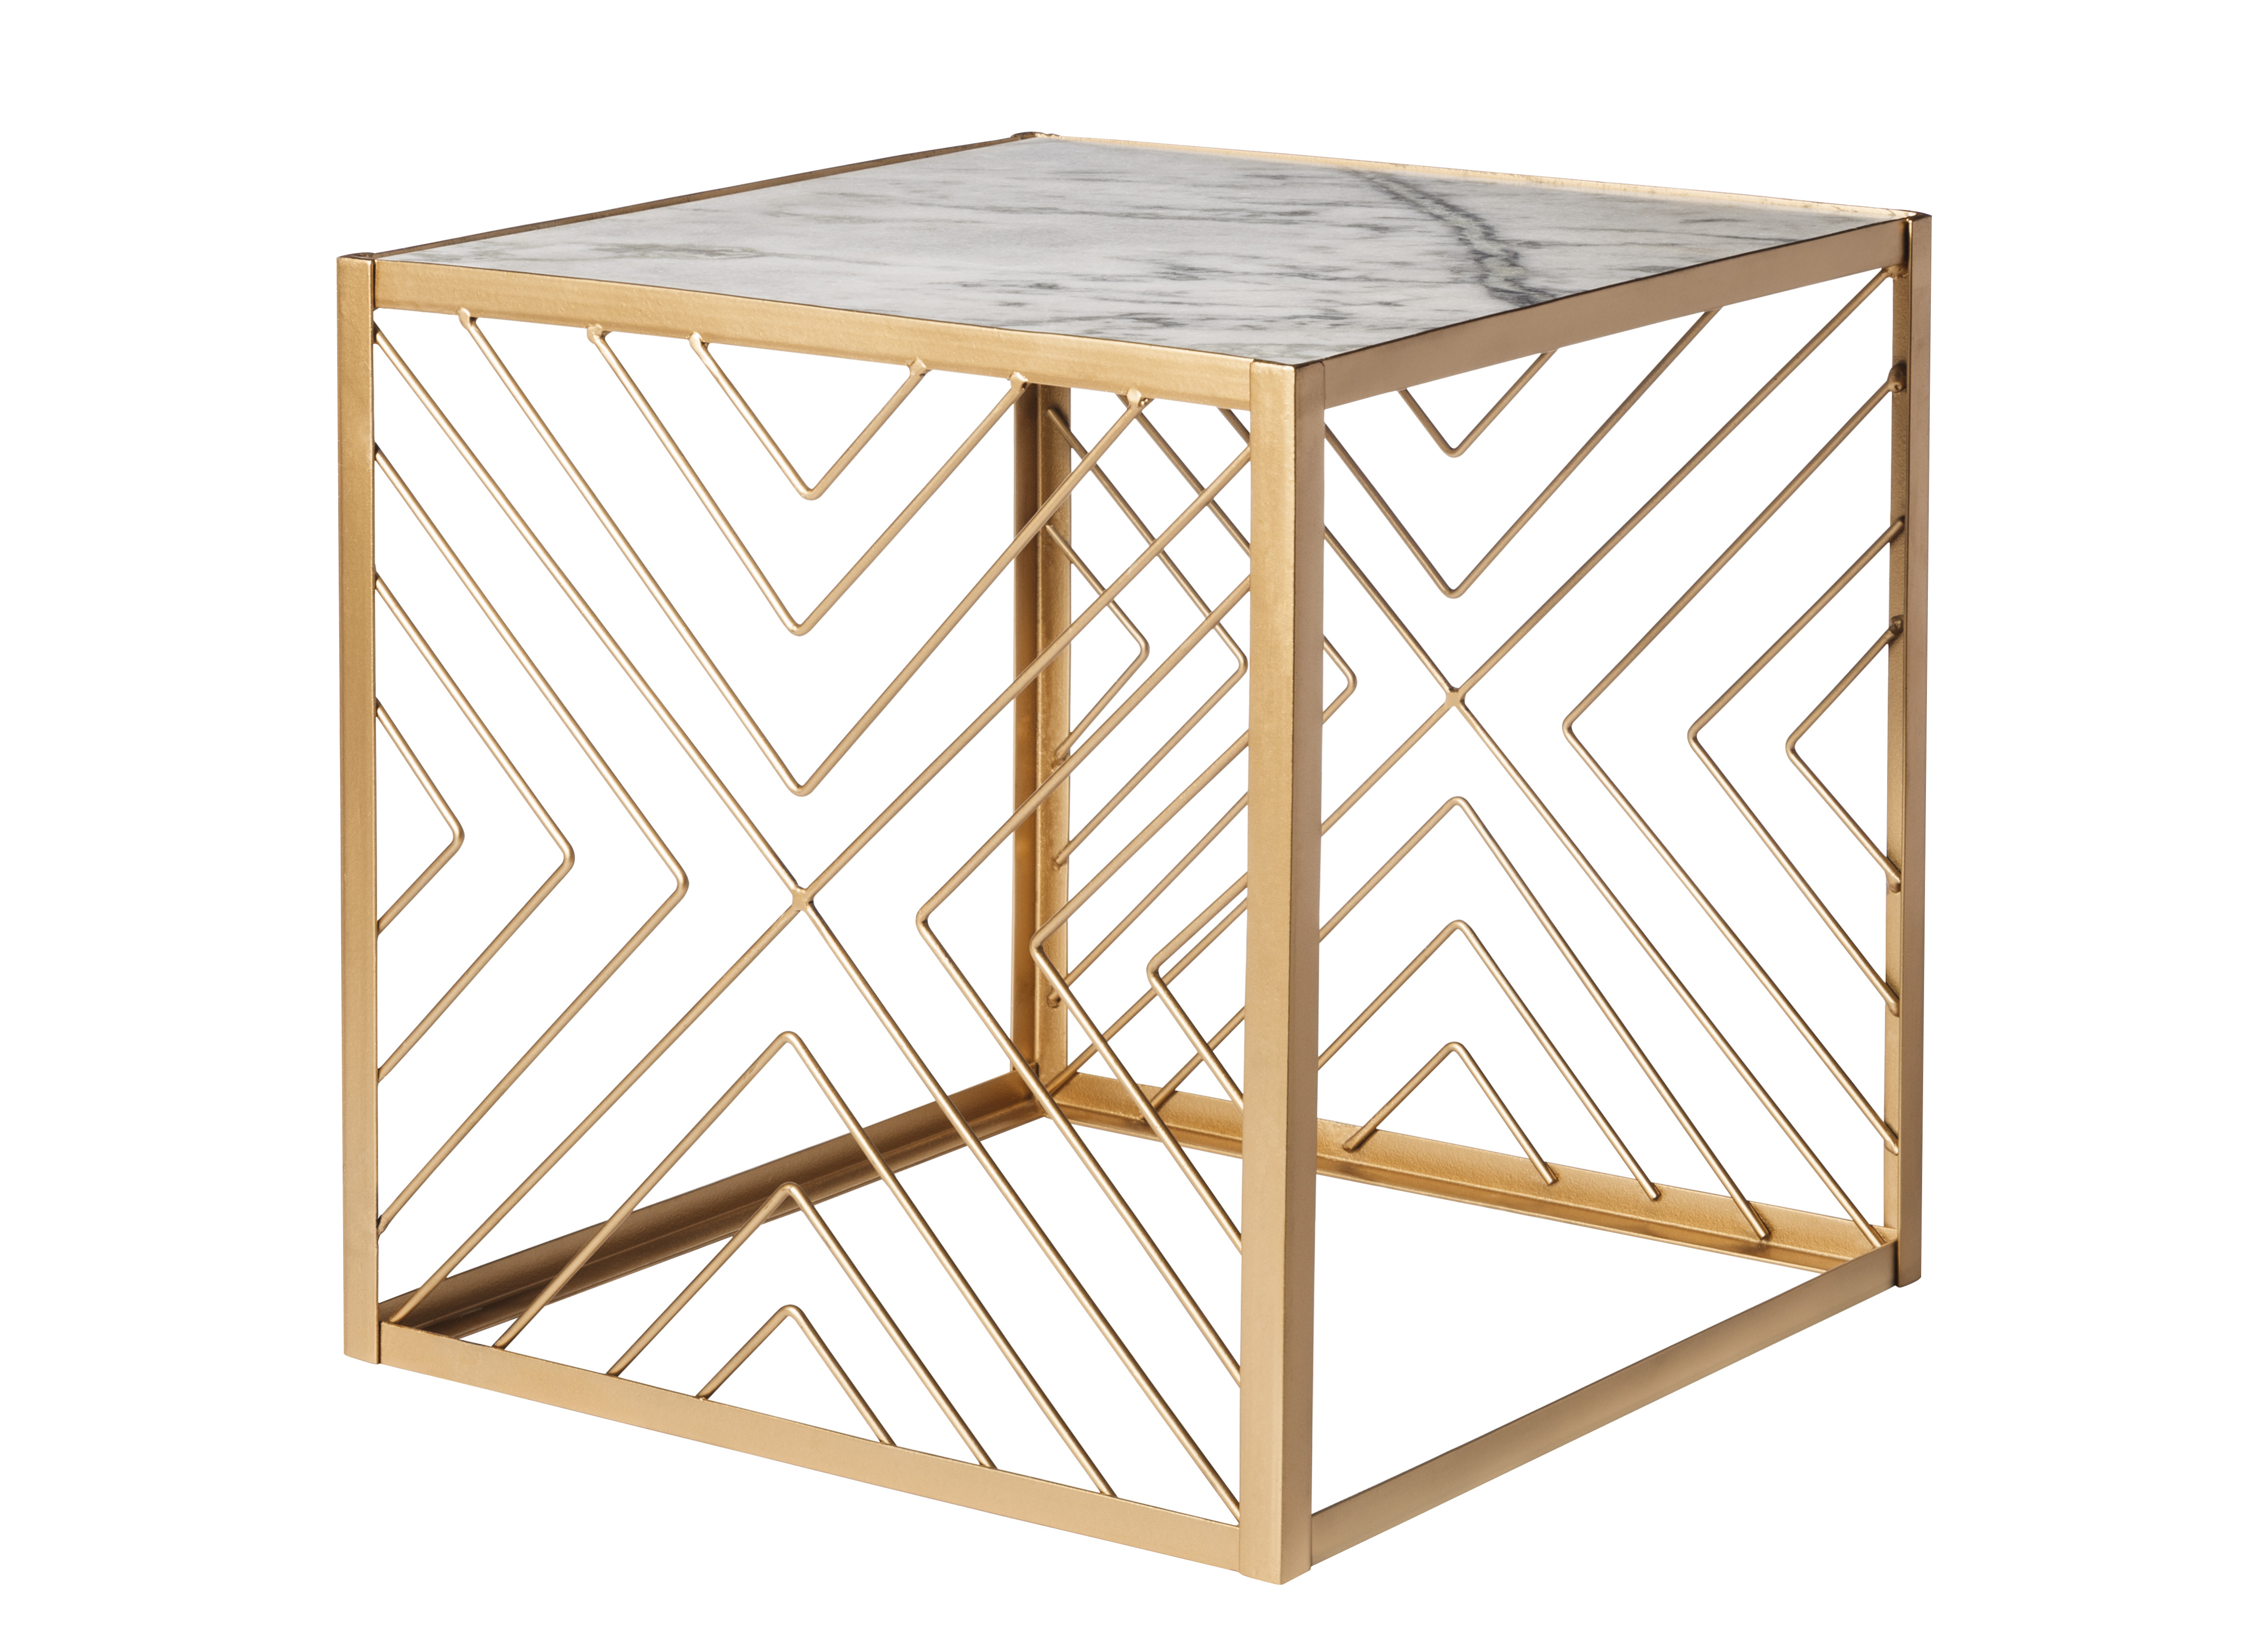 nate berkus target fall holiday look accent table marble top glass side coffee folding patio furniture sage green portable massage pink umbrella dining protector gold center blue